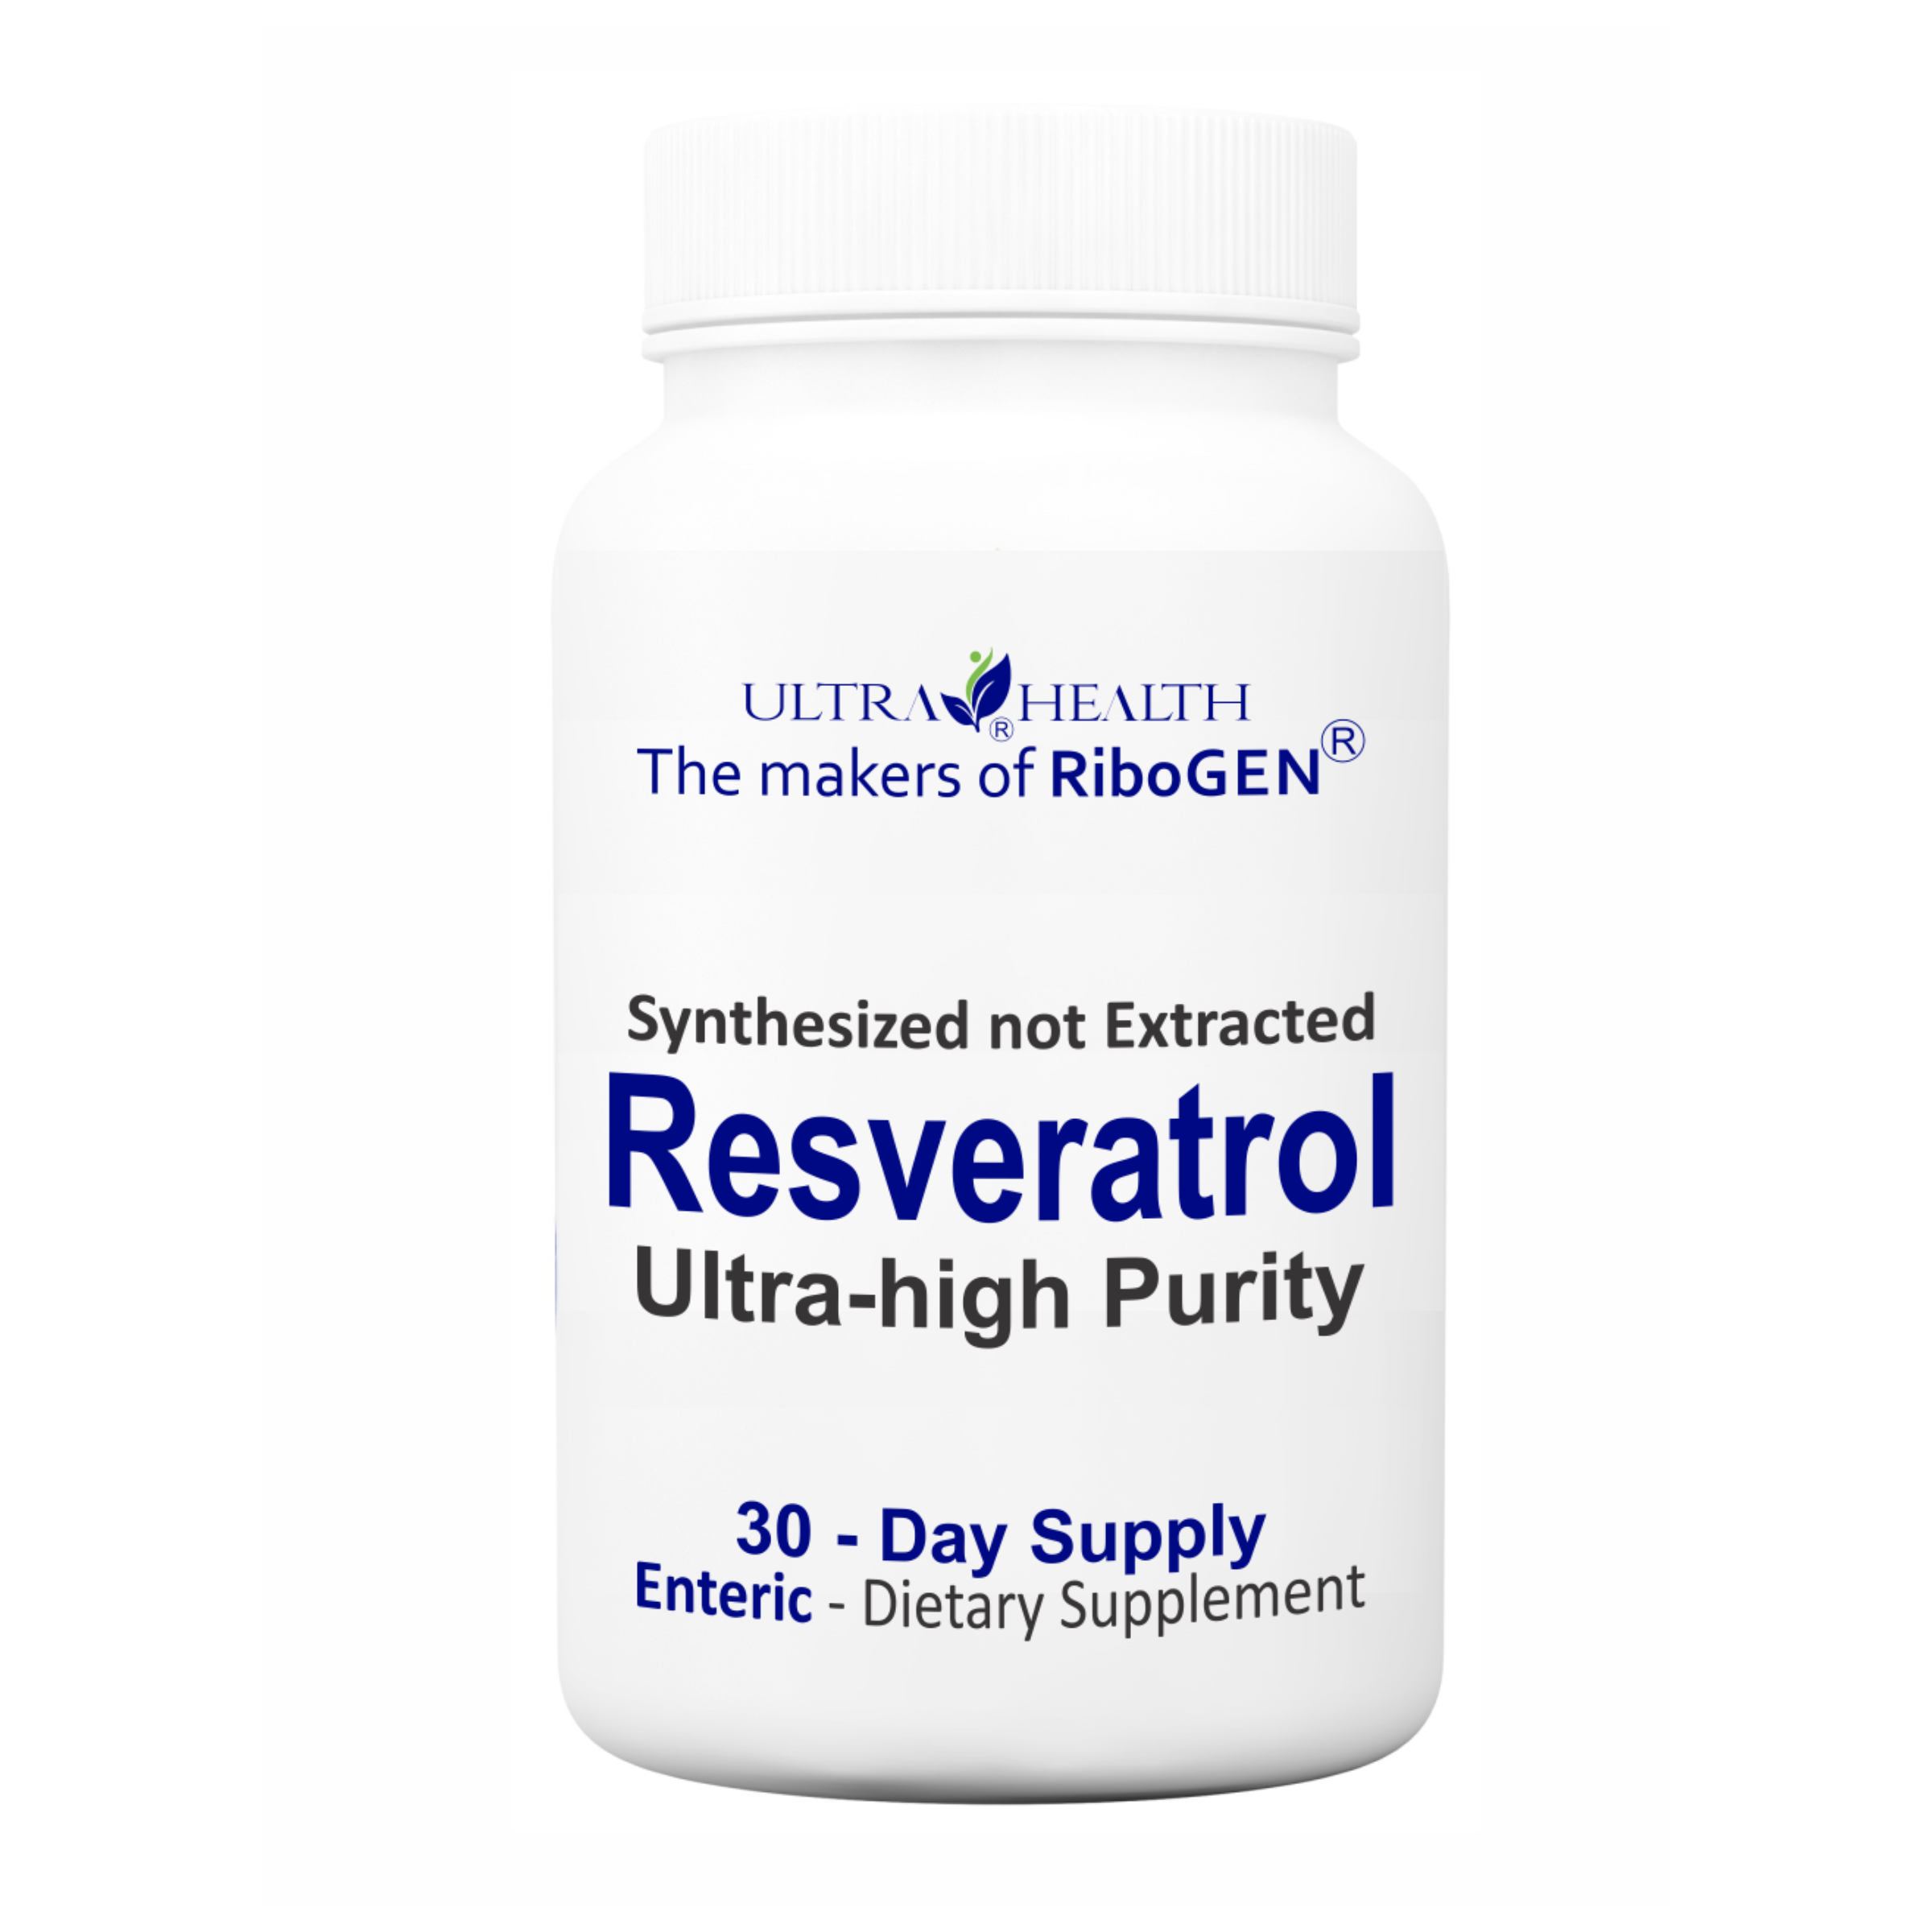 ResveraGEN™ 30 INTL ENTERIC (Resveratrol): Ultra-pure Pharmaceutical Grade 300mg (Resveratrol: CAS No. 501-36-0), 30-Day Supply, not extracted but synthesized, no additives